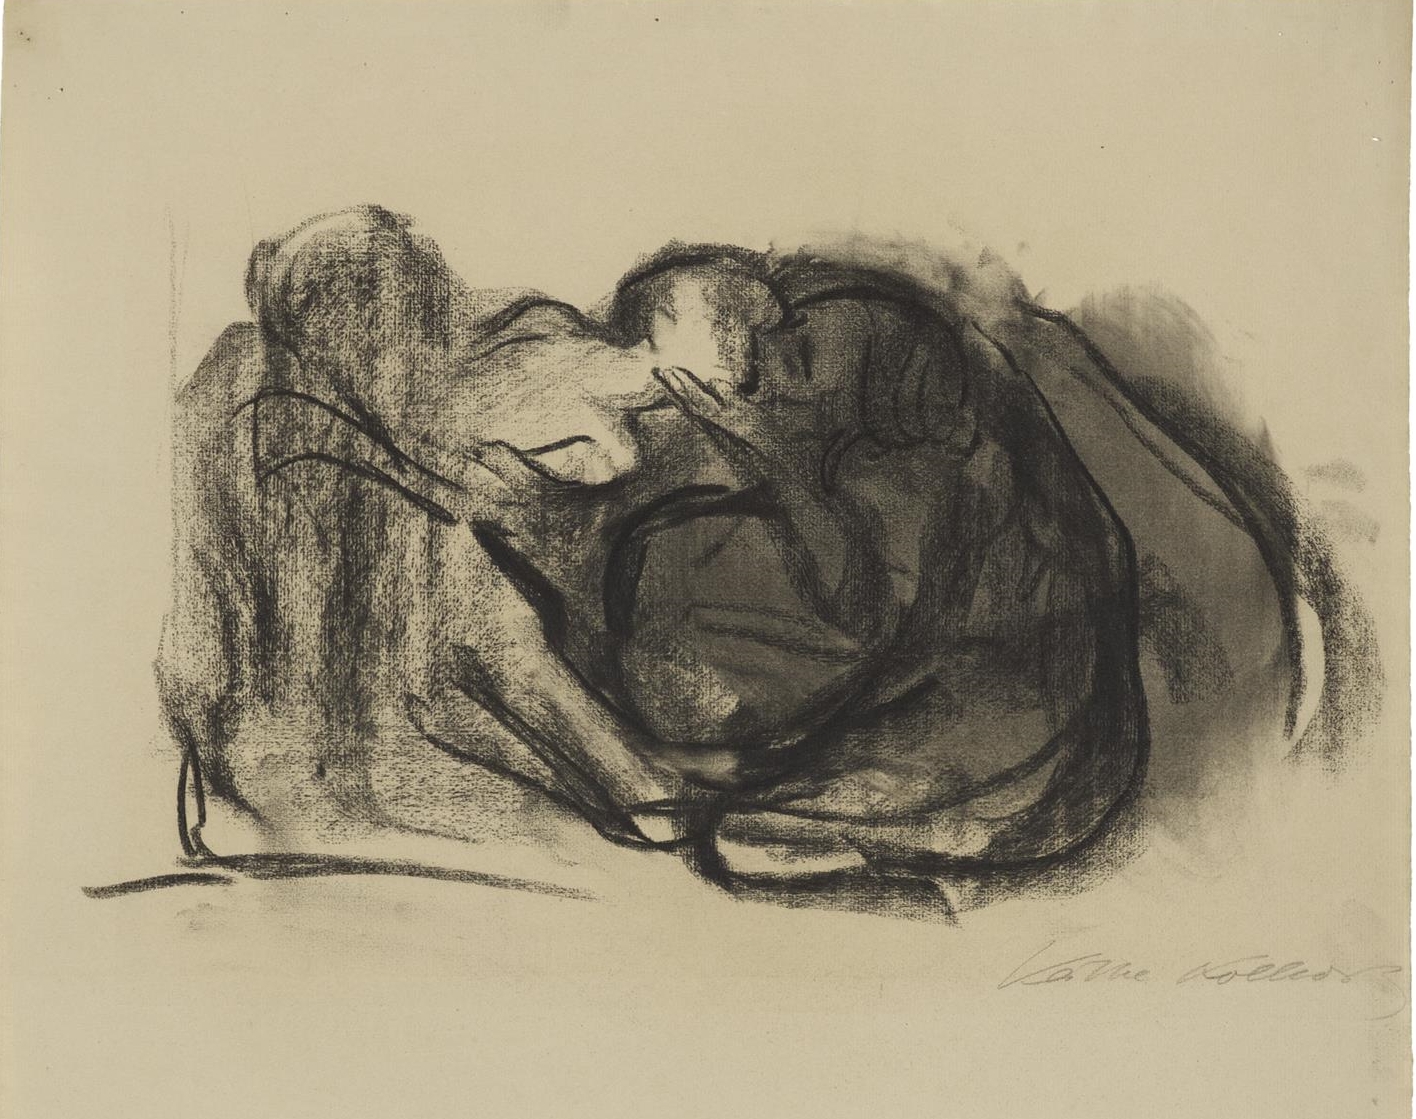 Käthe Kollwitz, Death snatching a Child from its Mother, 1911, charcoal, blotted, on Ingres paper, NT 634, Cologne Kollwitz Collection © Käthe Kollwitz Museum Köln